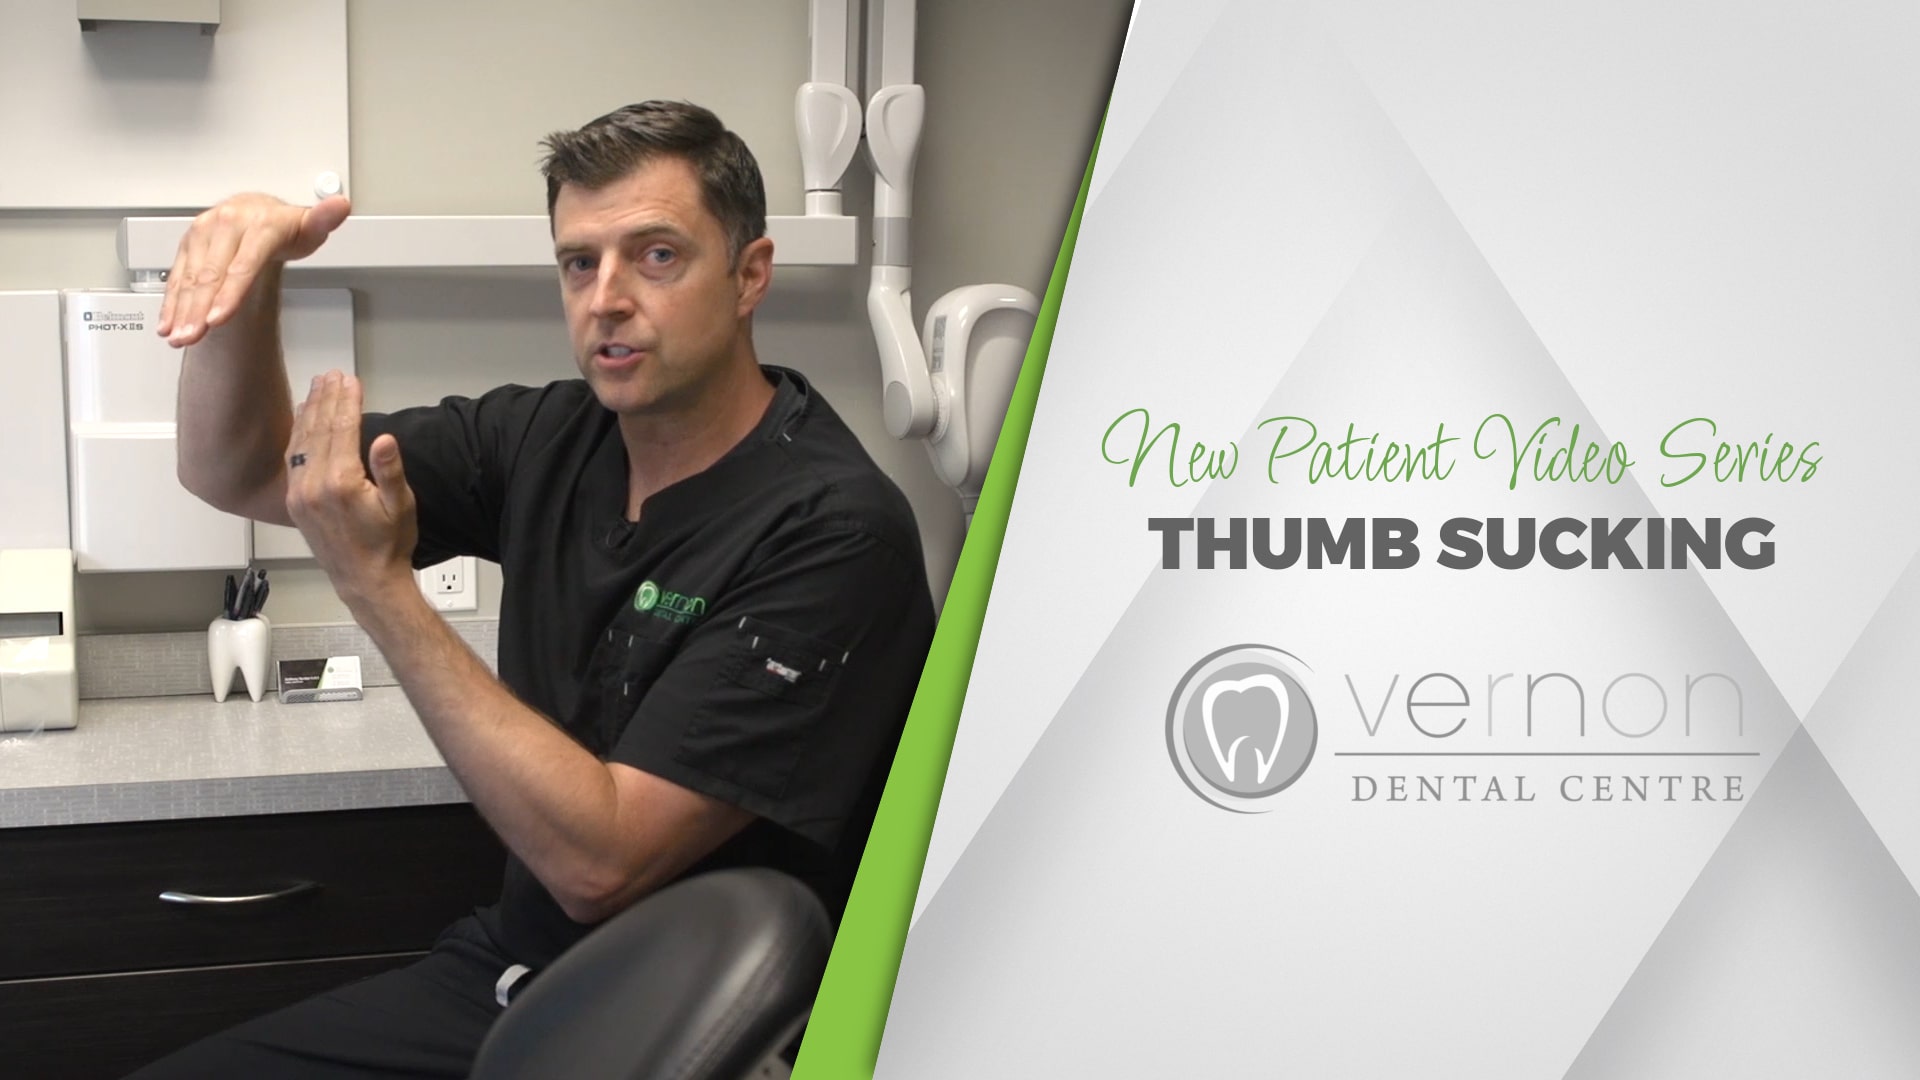 Dr. Anthony Berdan from the Vernon Dental Centre discusses thumb sucking and kid's dentistry